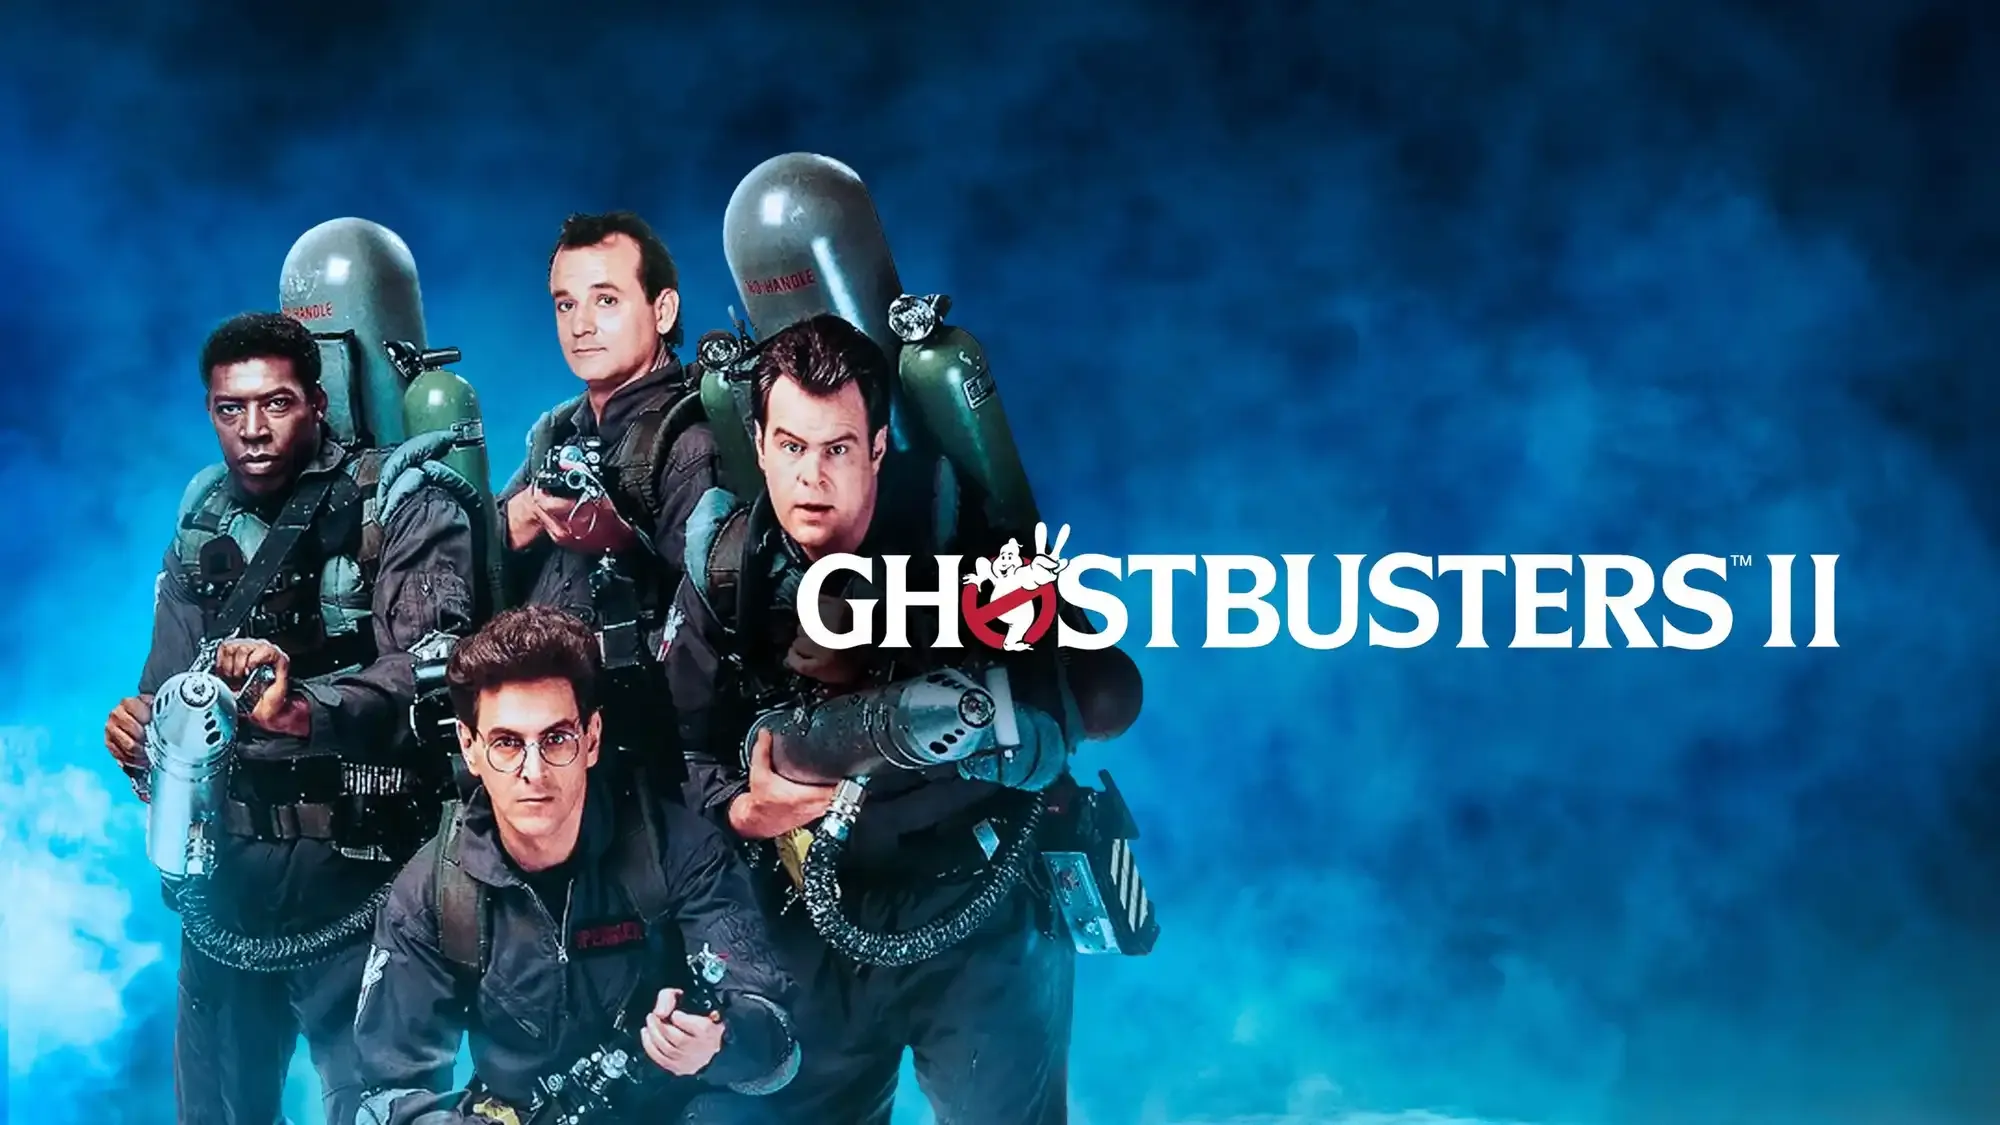 Ghostbusters II movie review